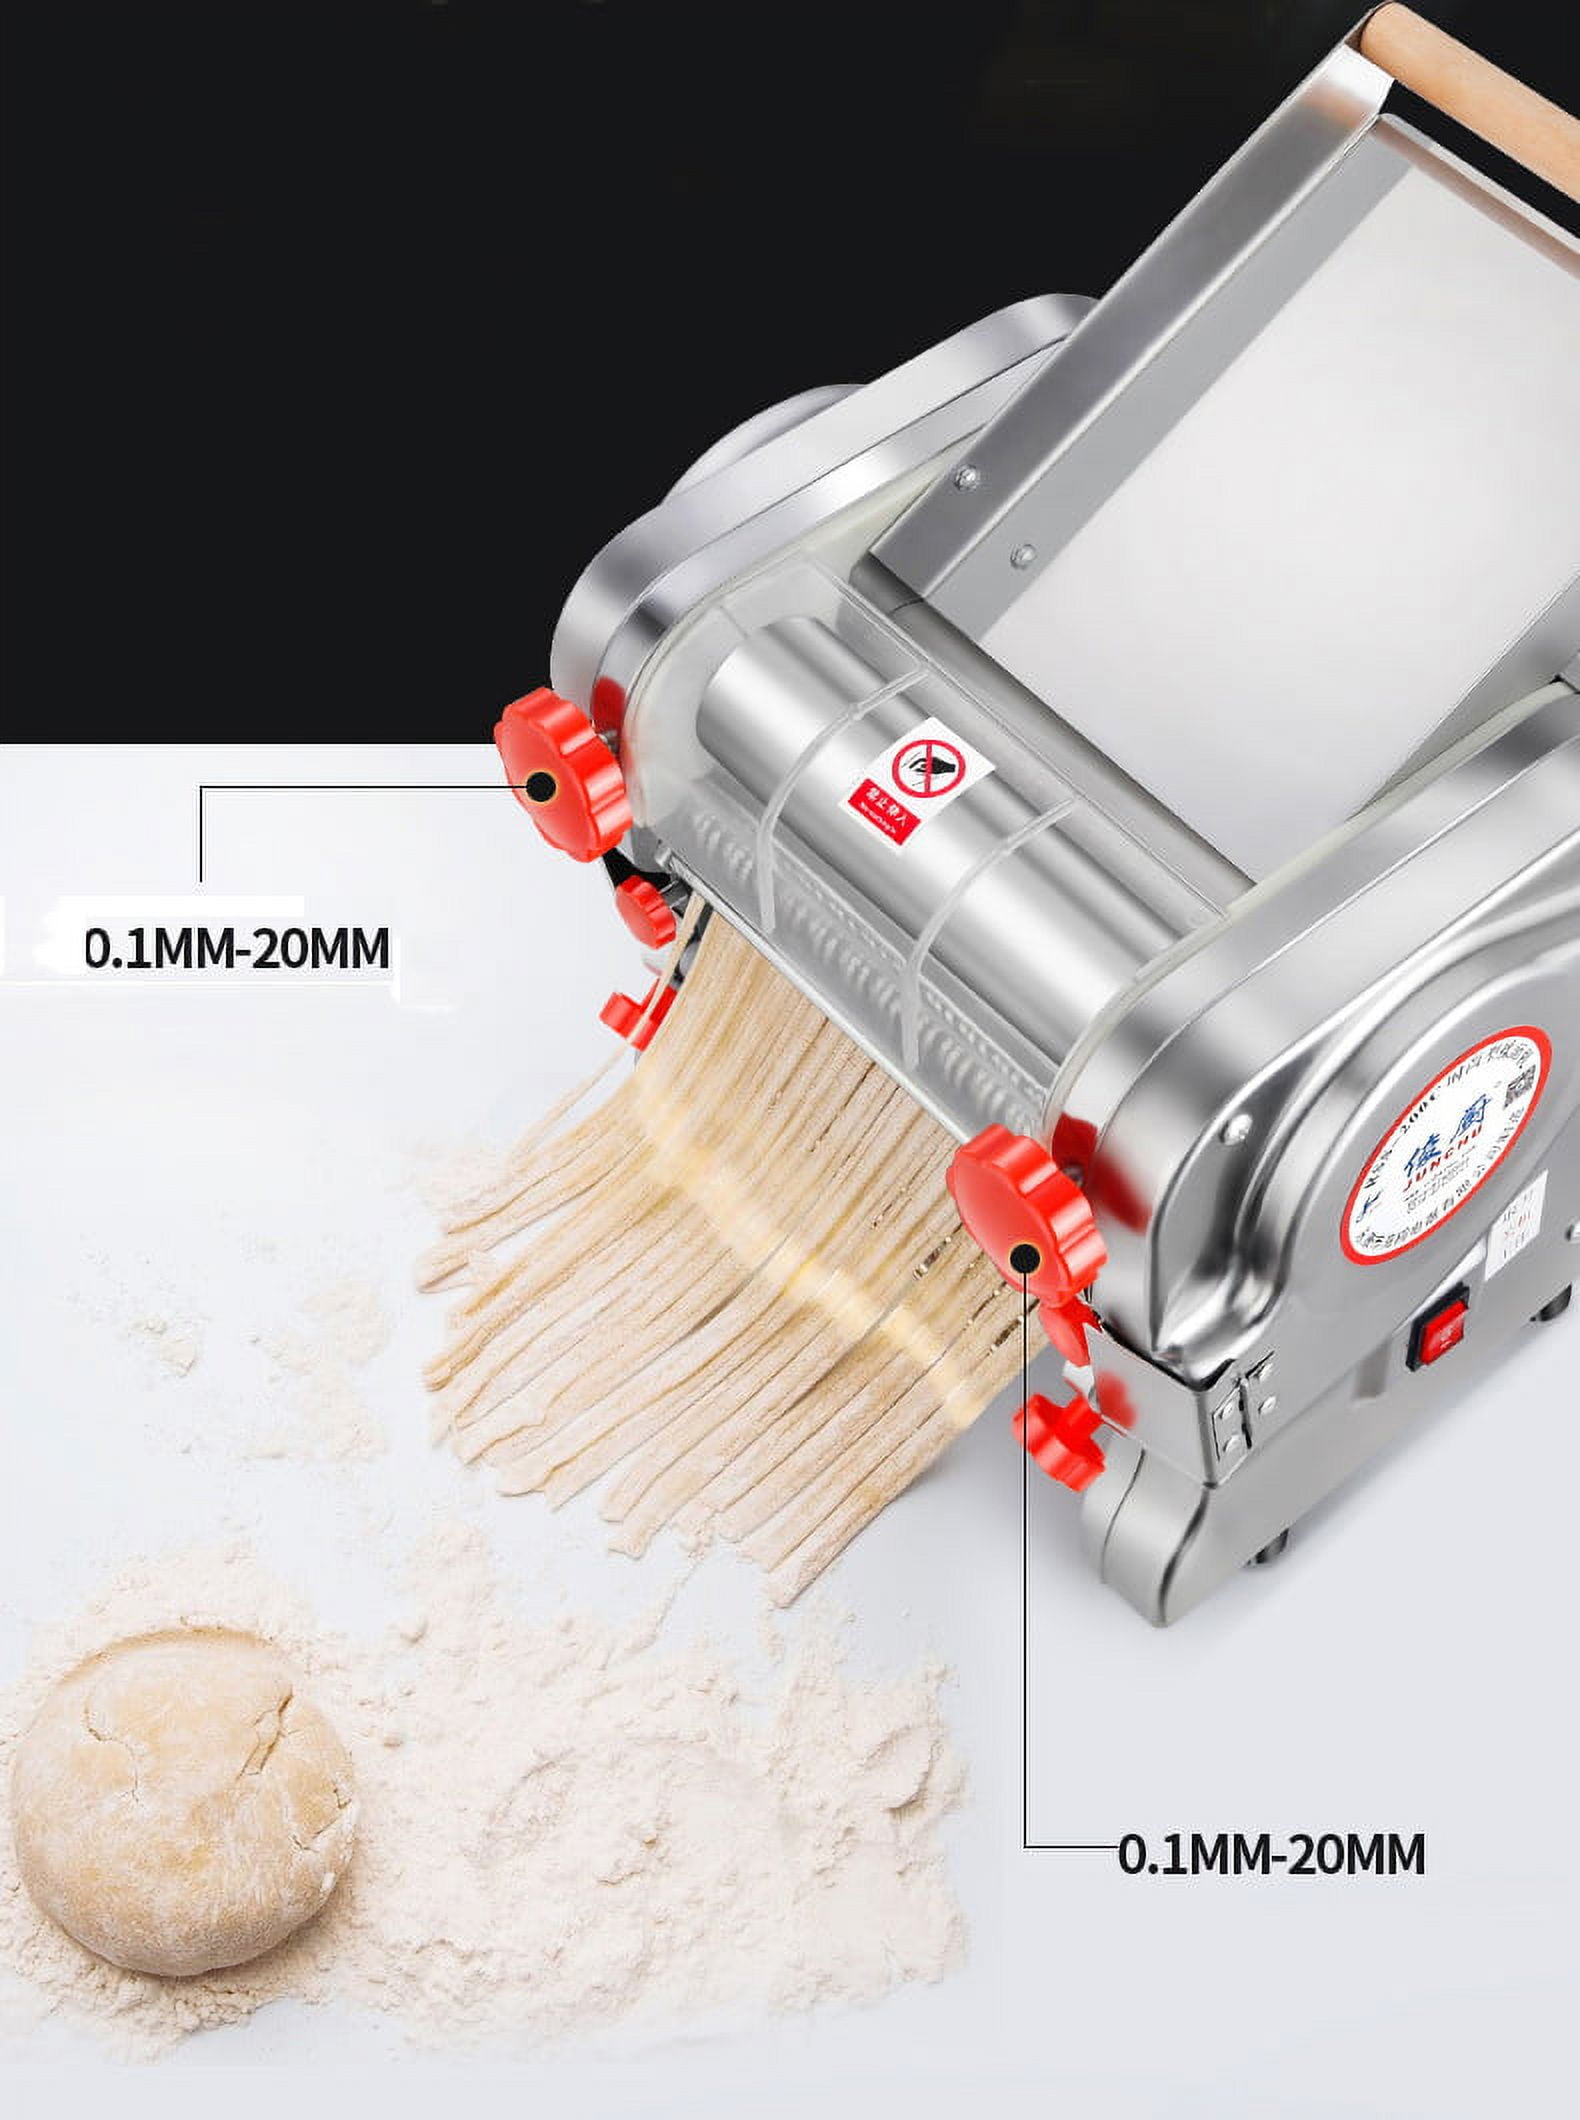 110V/220V Pasta Maker,Electric Pasta Machine,With Thirteen Noodle  Modules,Perfect For Homemade Fresh Noodle,Red